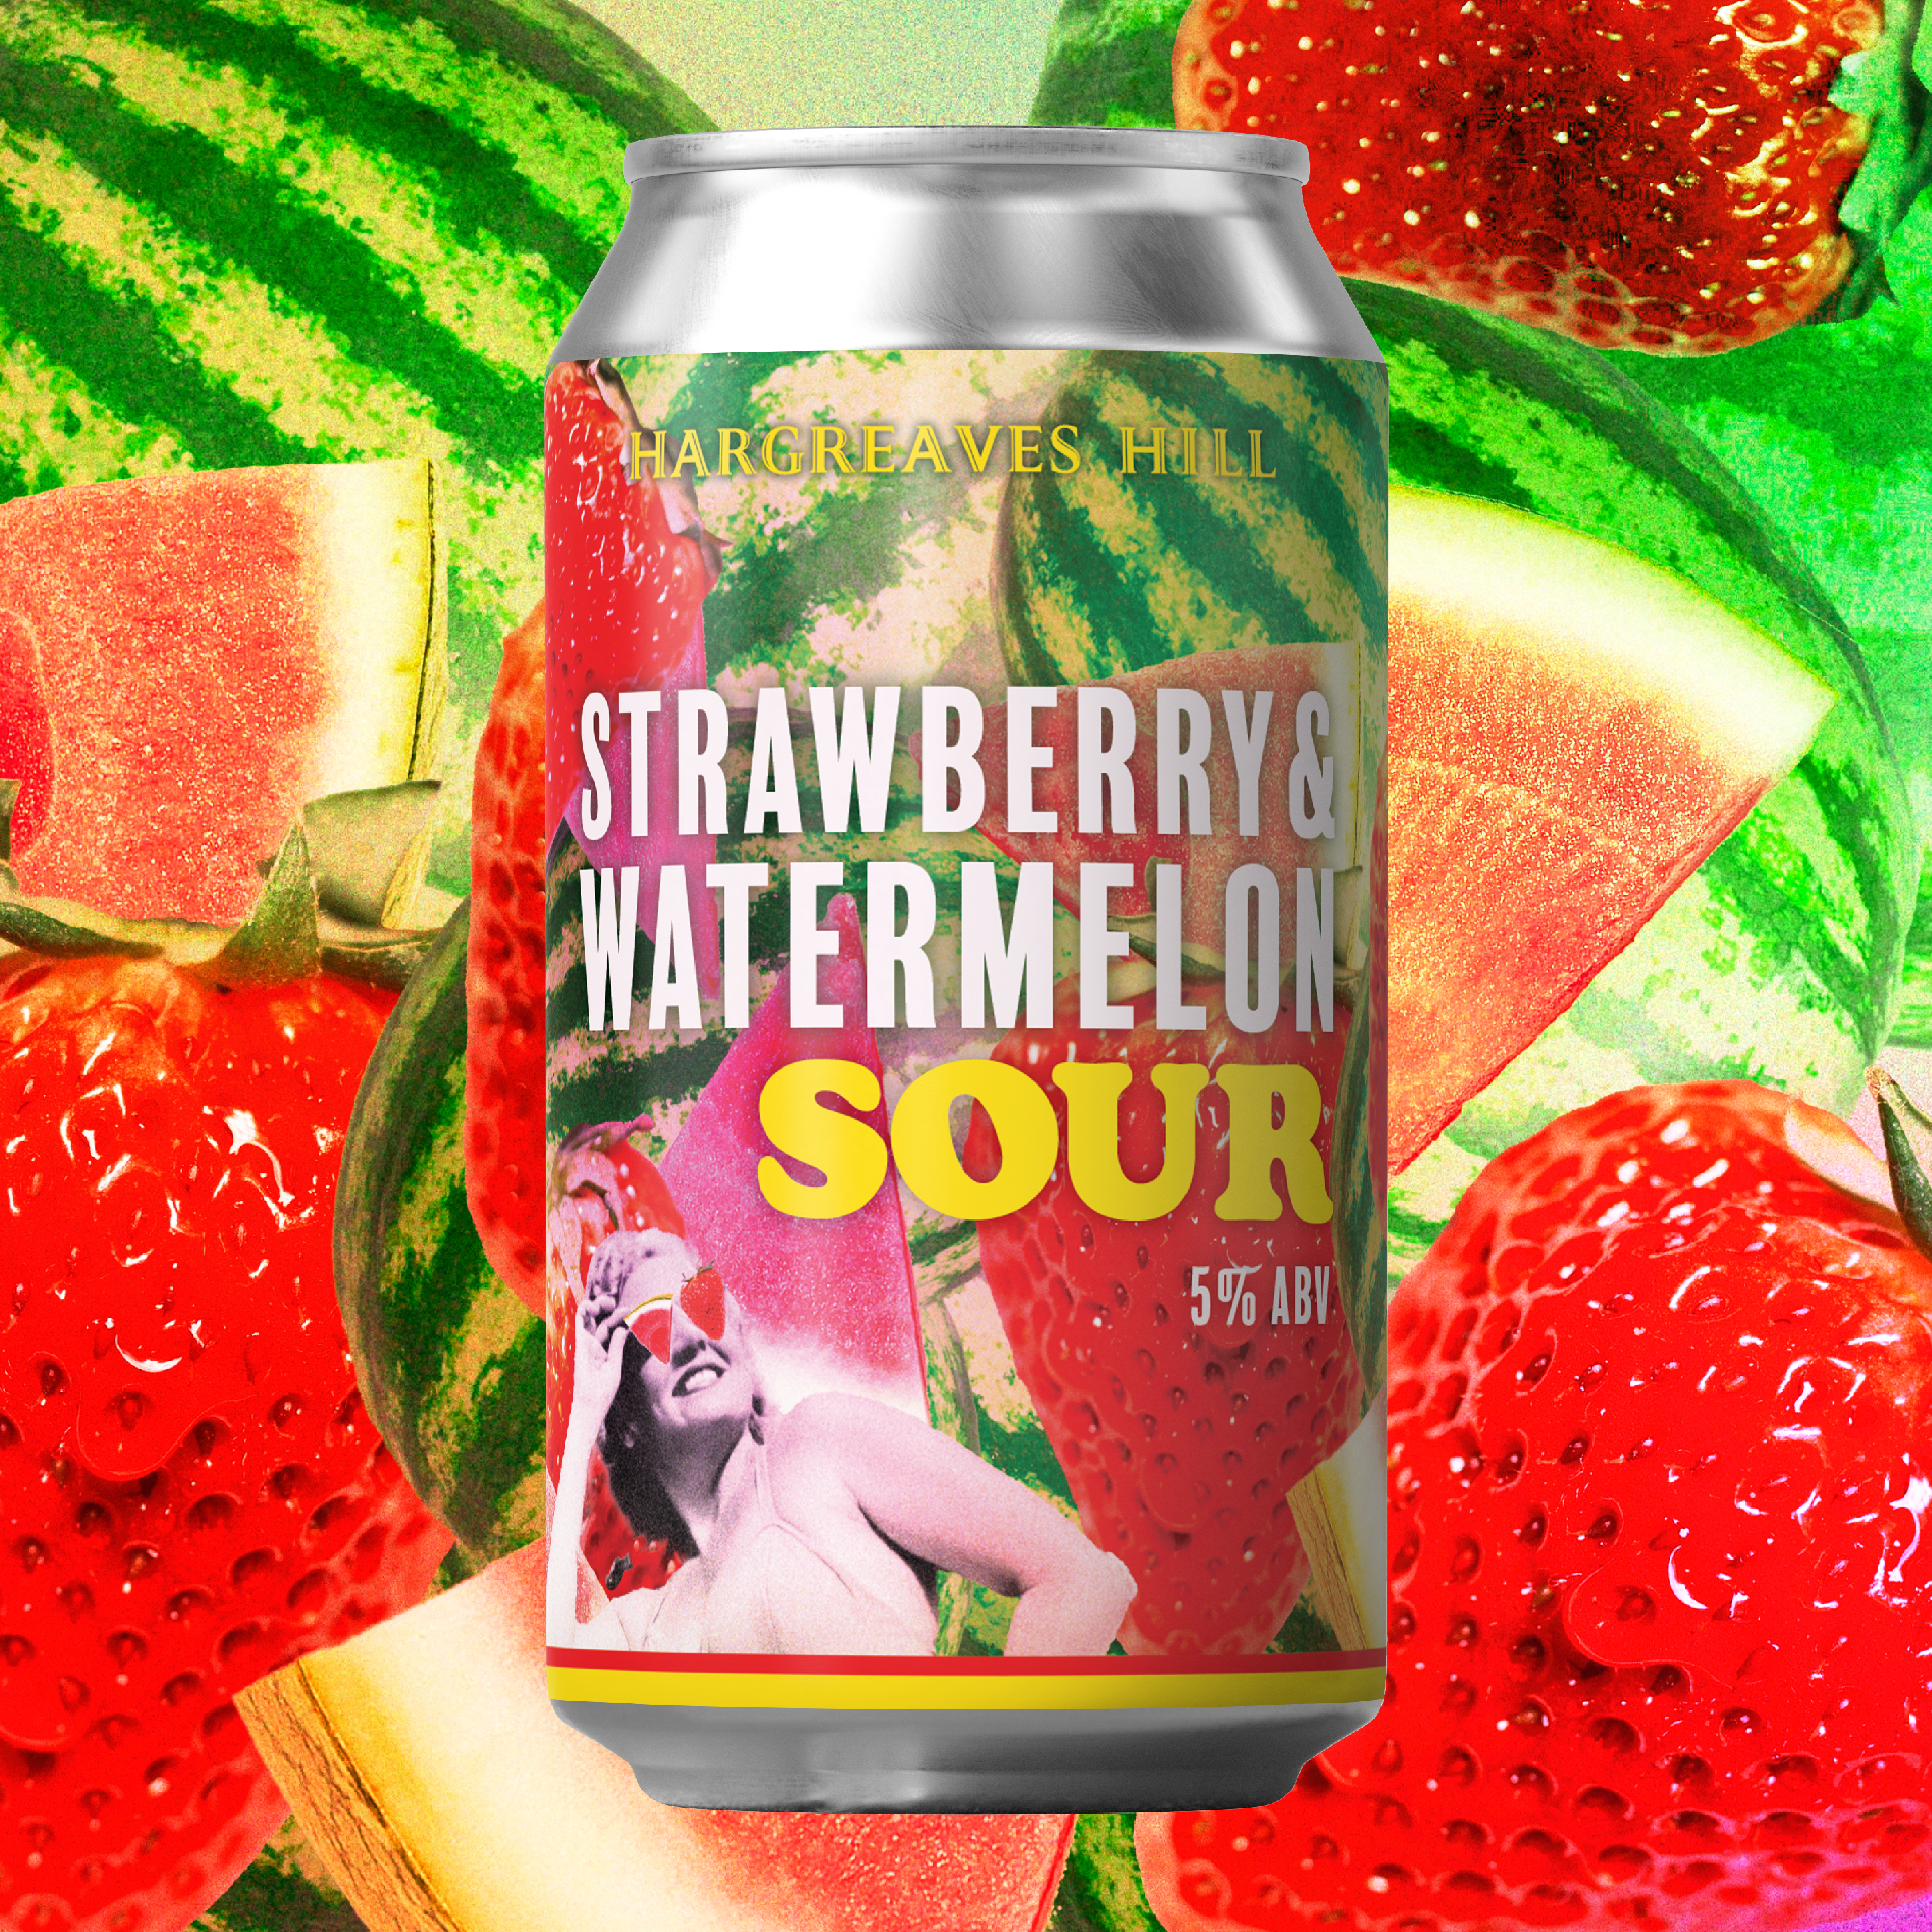 Strawberry and Watermelon Sour - 5% ABV